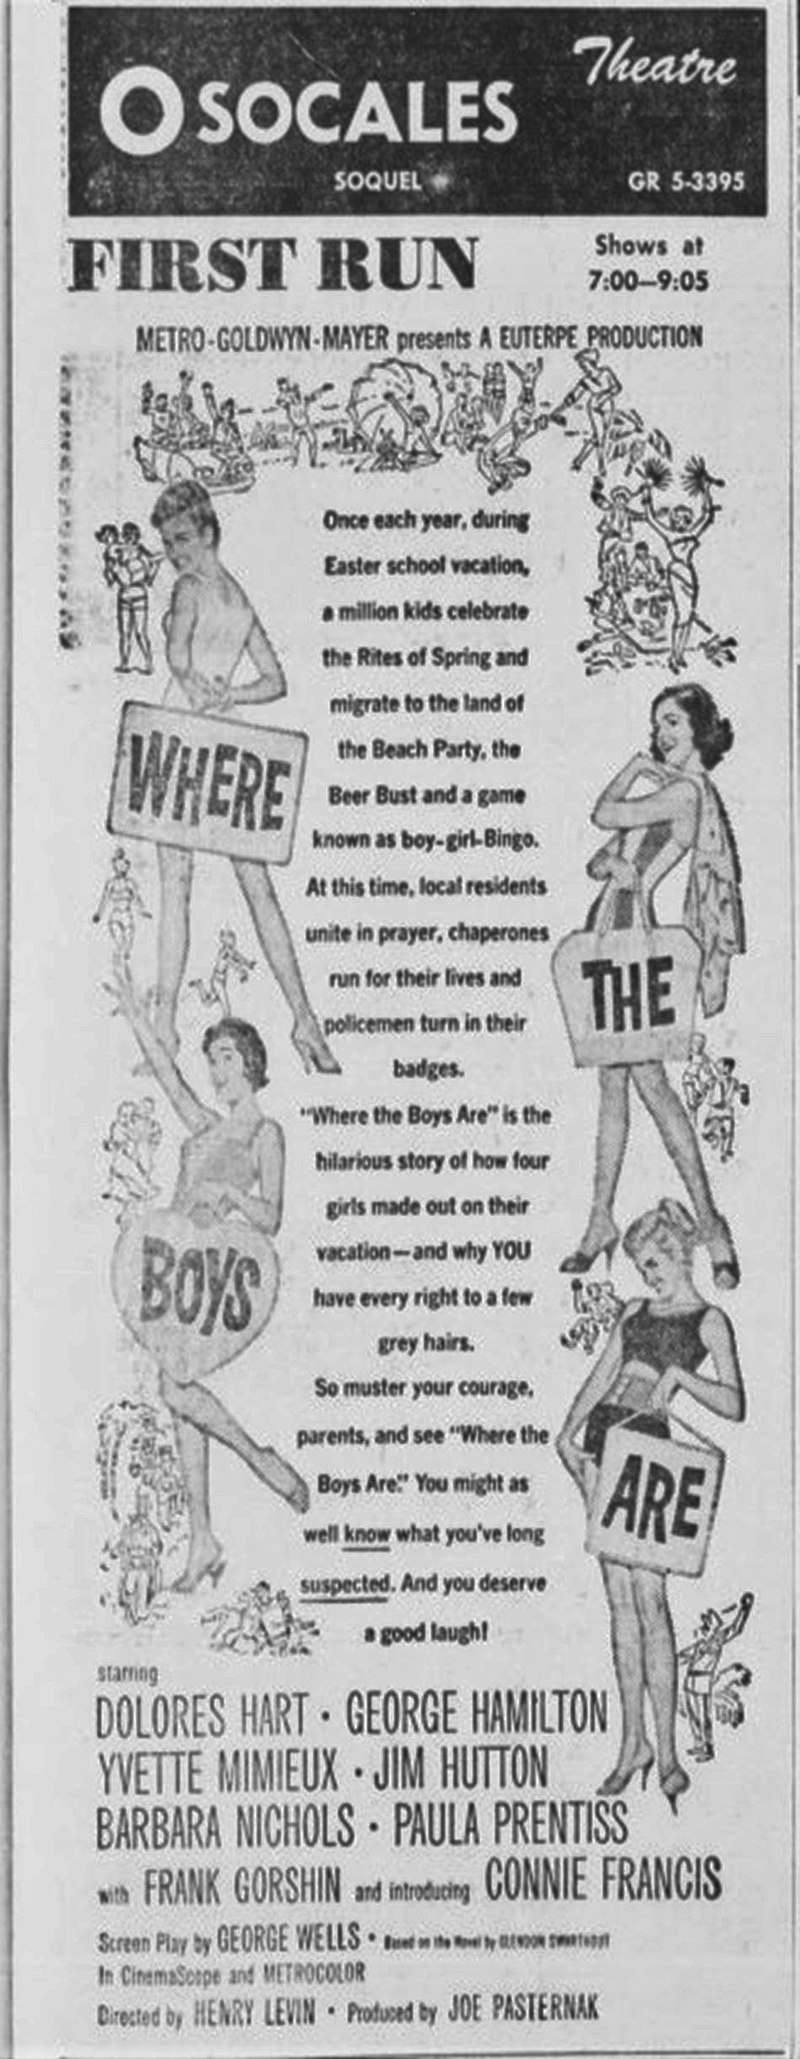 Osocales theater advertisement for the comedy film, Where the Boys Are, 13 January 1961